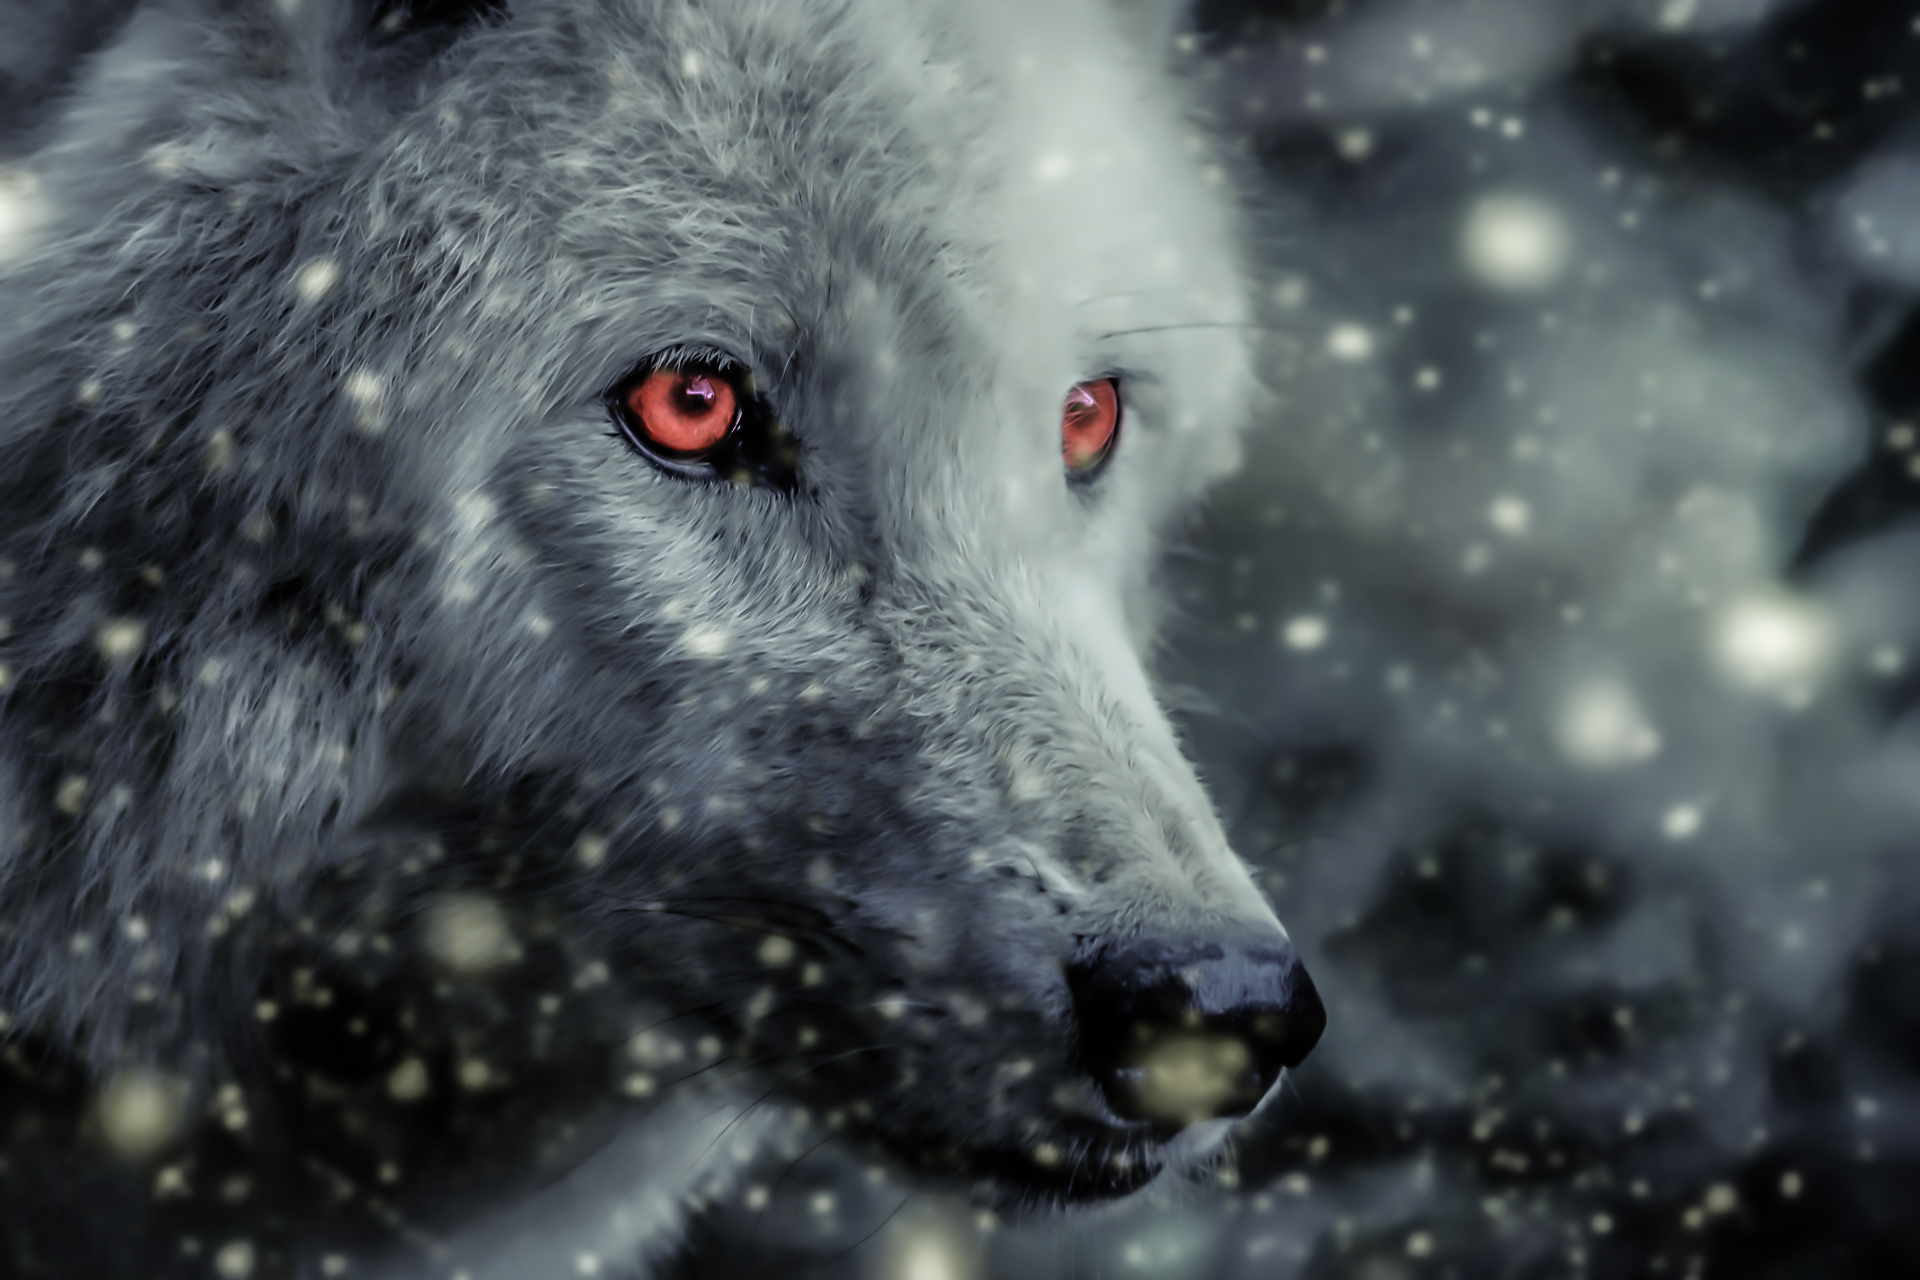 A close up of an animal with red eyes - Eyes, magic, wolf